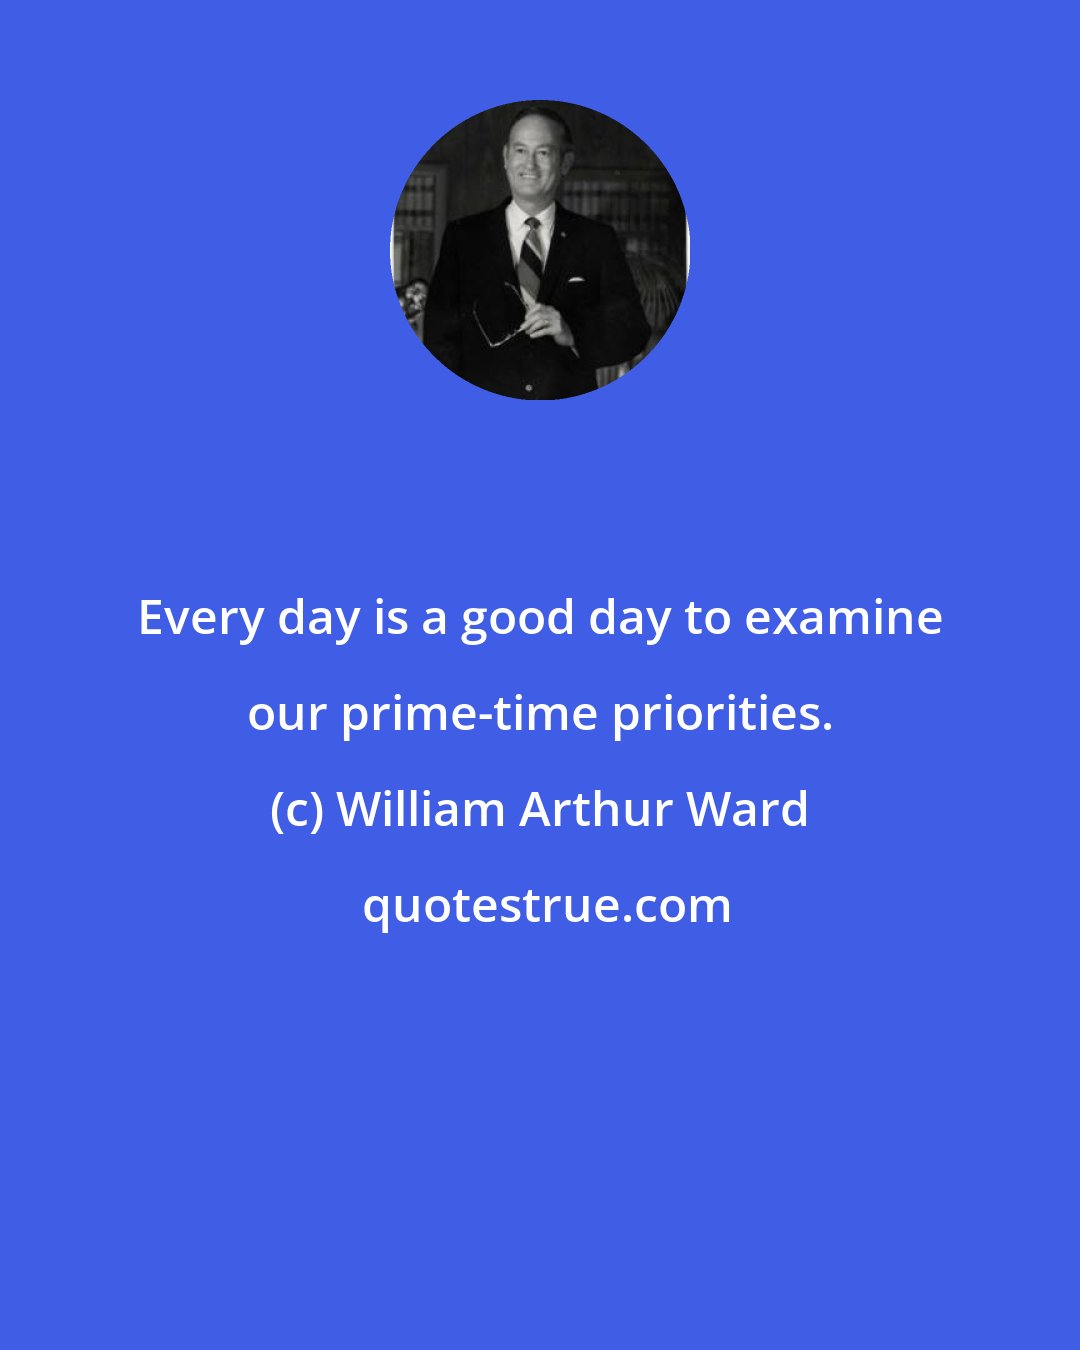 William Arthur Ward: Every day is a good day to examine our prime-time priorities.